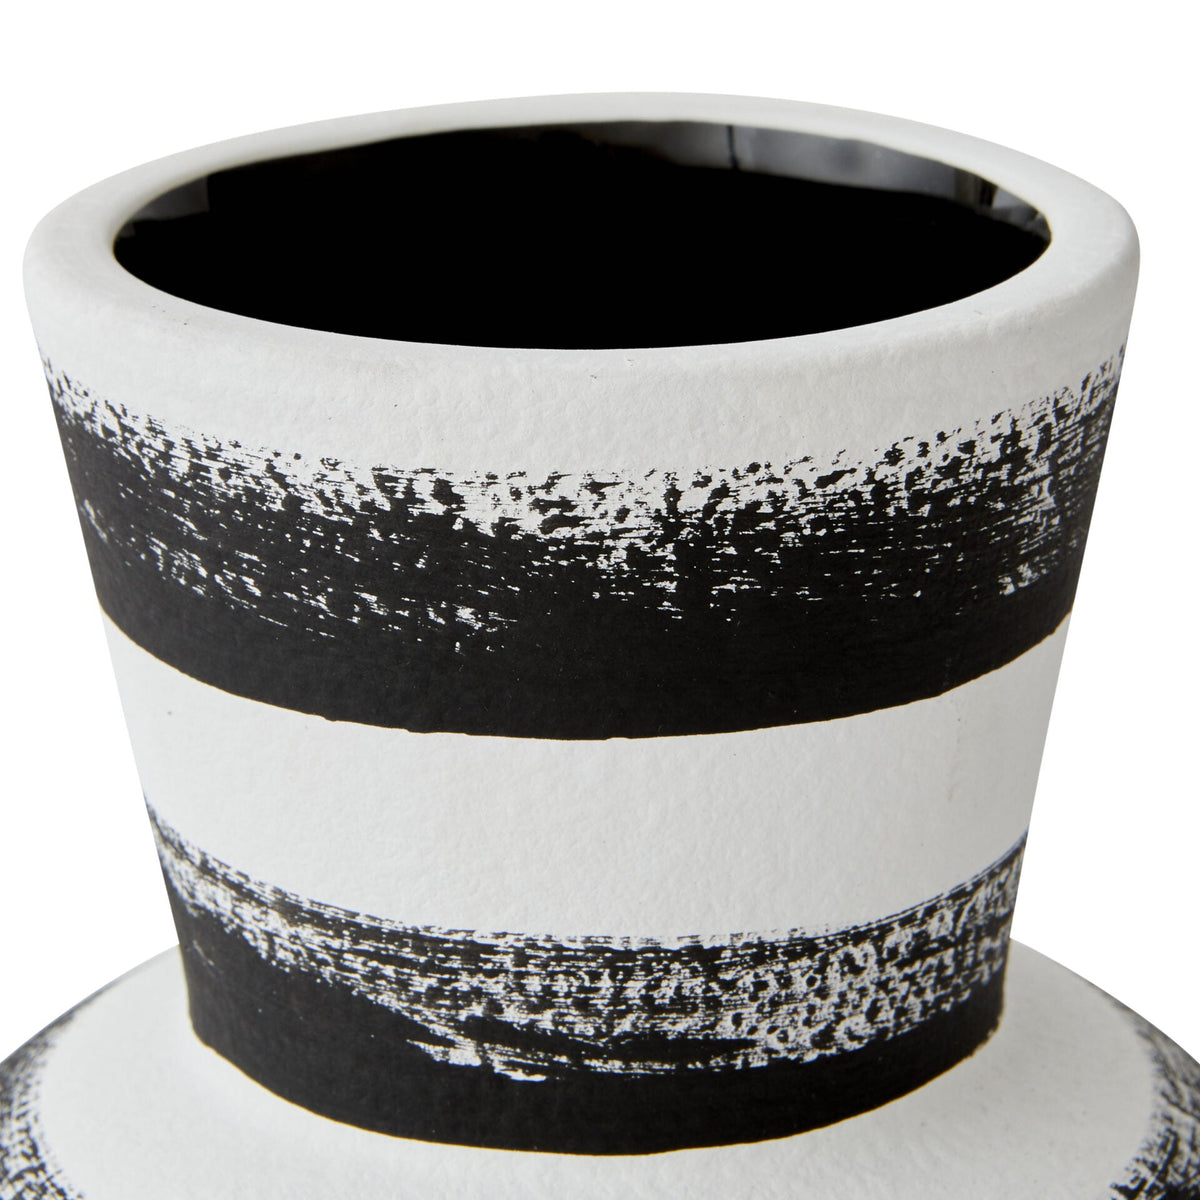 Ceramic Brushed Vase in Black and White - Small